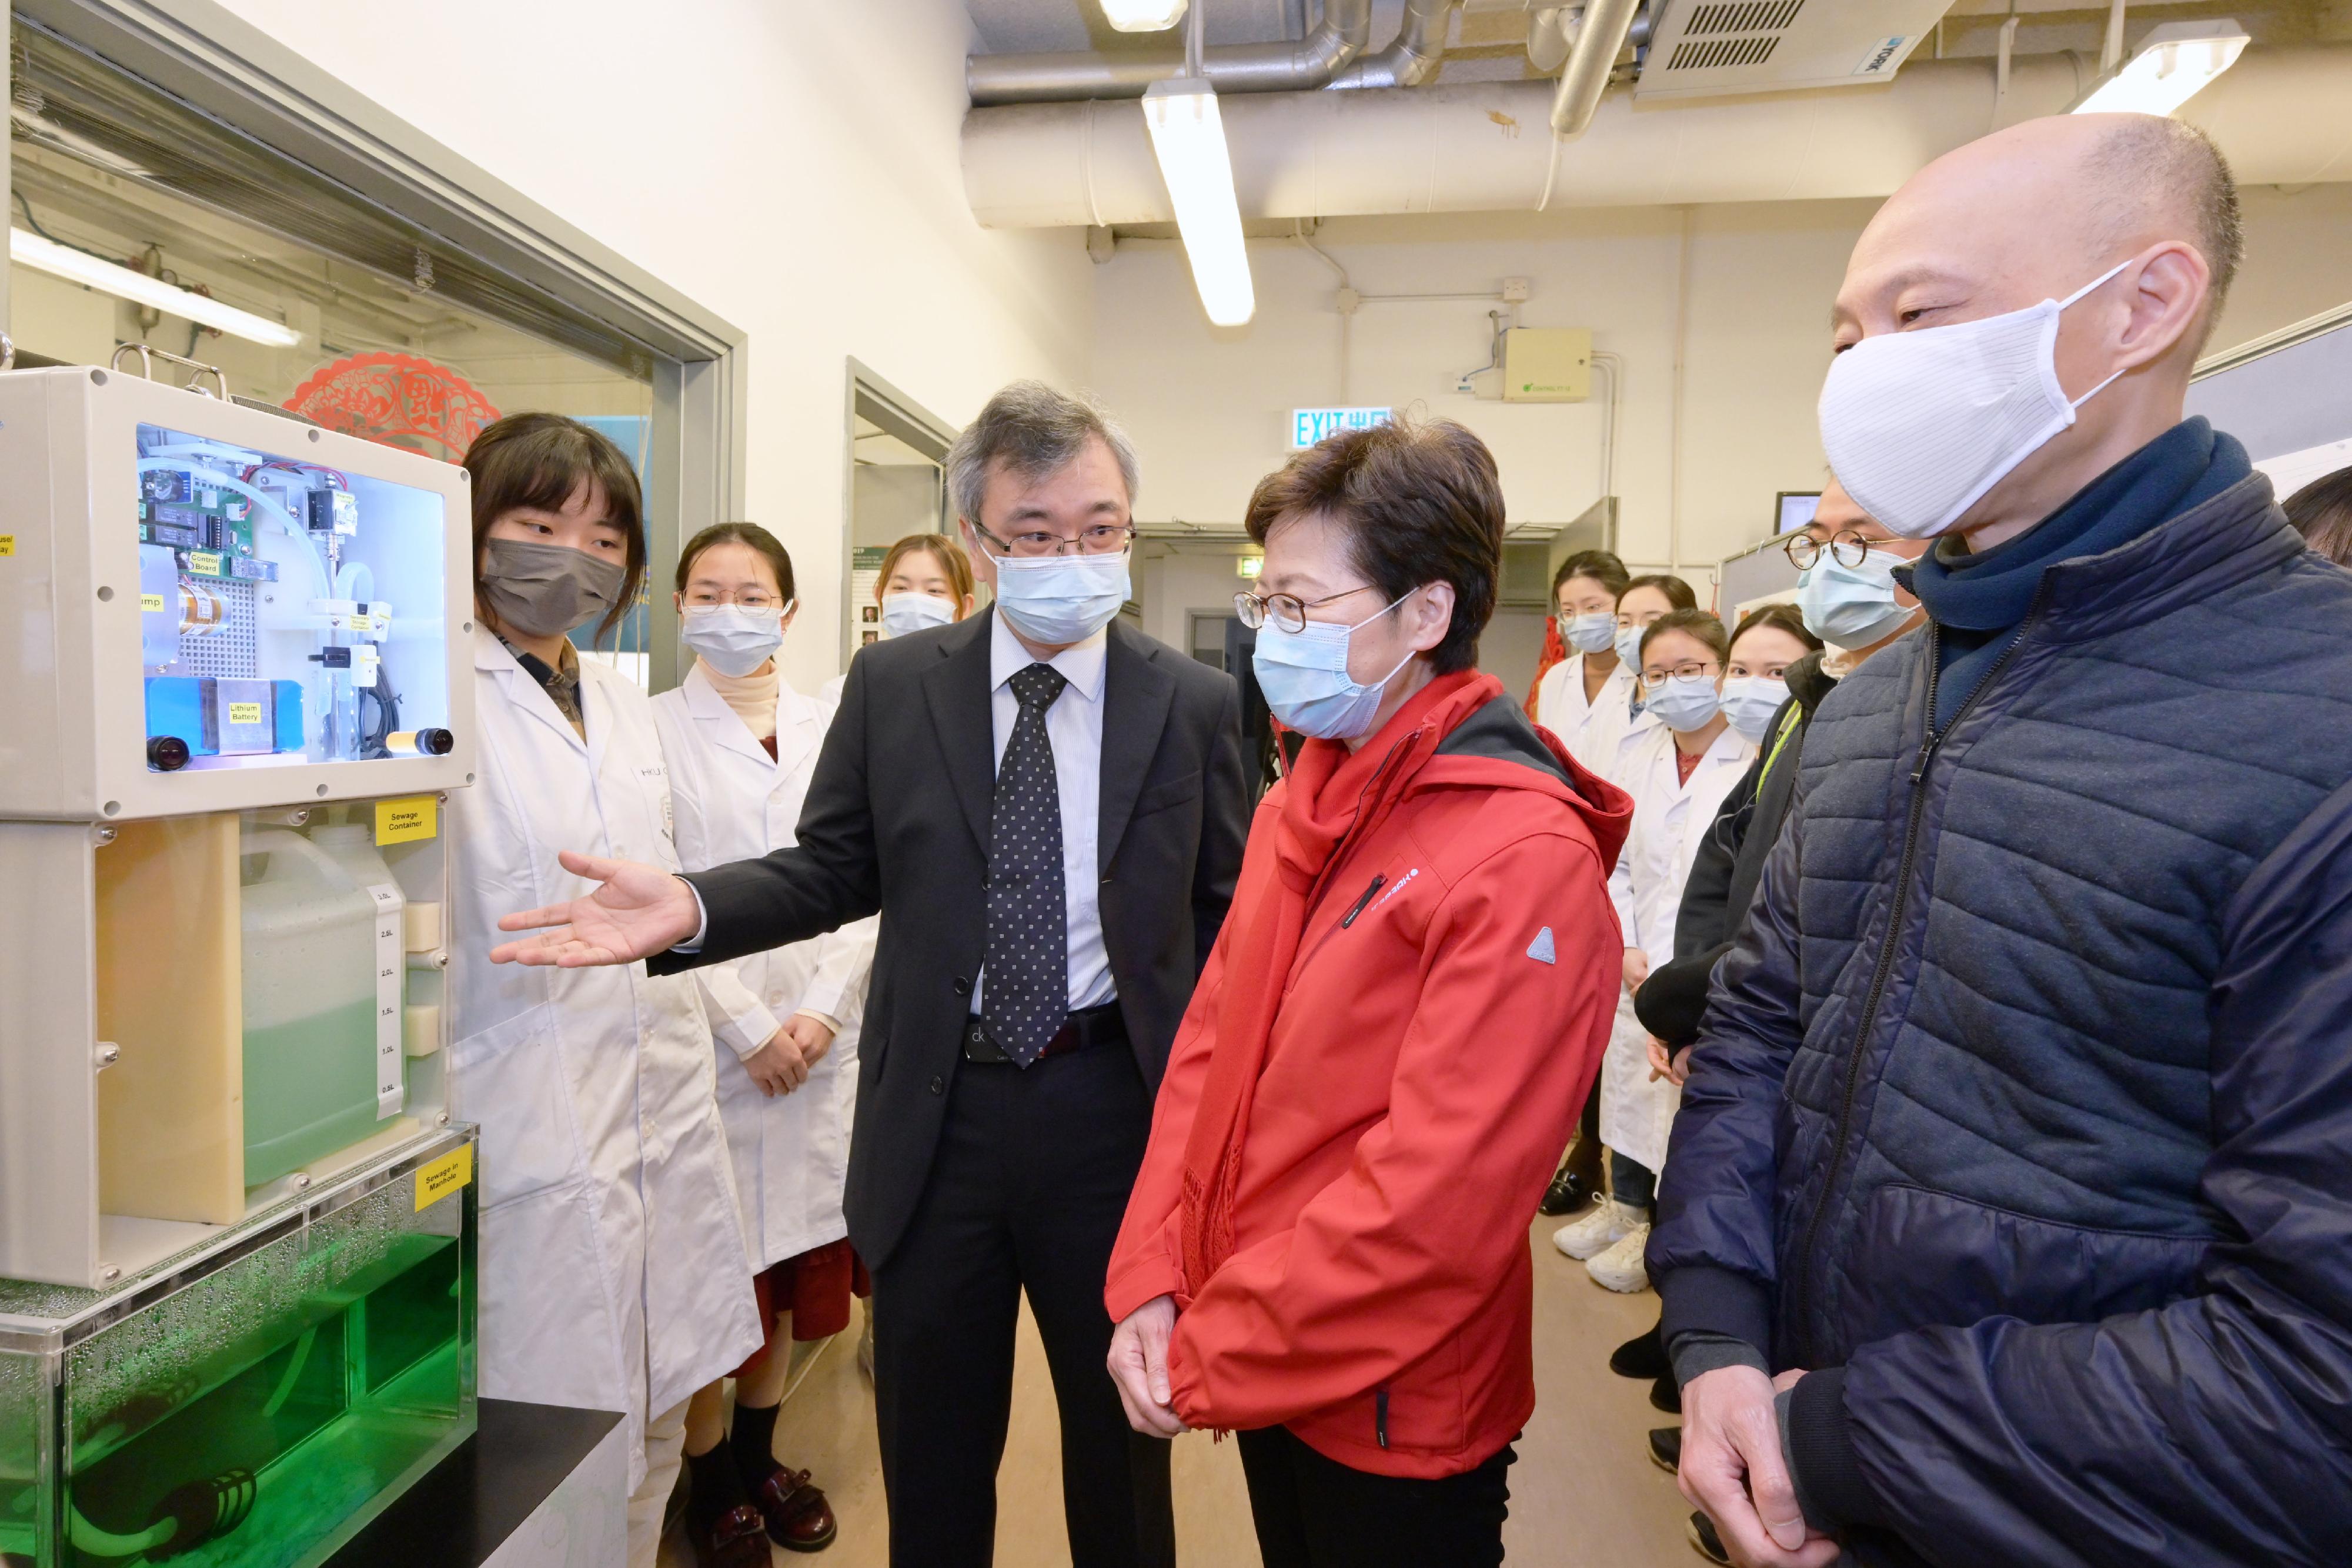 The Chief Executive, Mrs Carrie Lam, visited the Environmental Microbiome Engineering and Biotechnology Laboratory of the University of Hong Kong today (February 2). Photo shows Mrs Lam (second right), accompanied by the Secretary for the Environment, Mr Wong Kam-sing (first right), being briefed by Professor Zhang Tong (third right) of the laboratory, on the treatment of sewage samples and testing process.